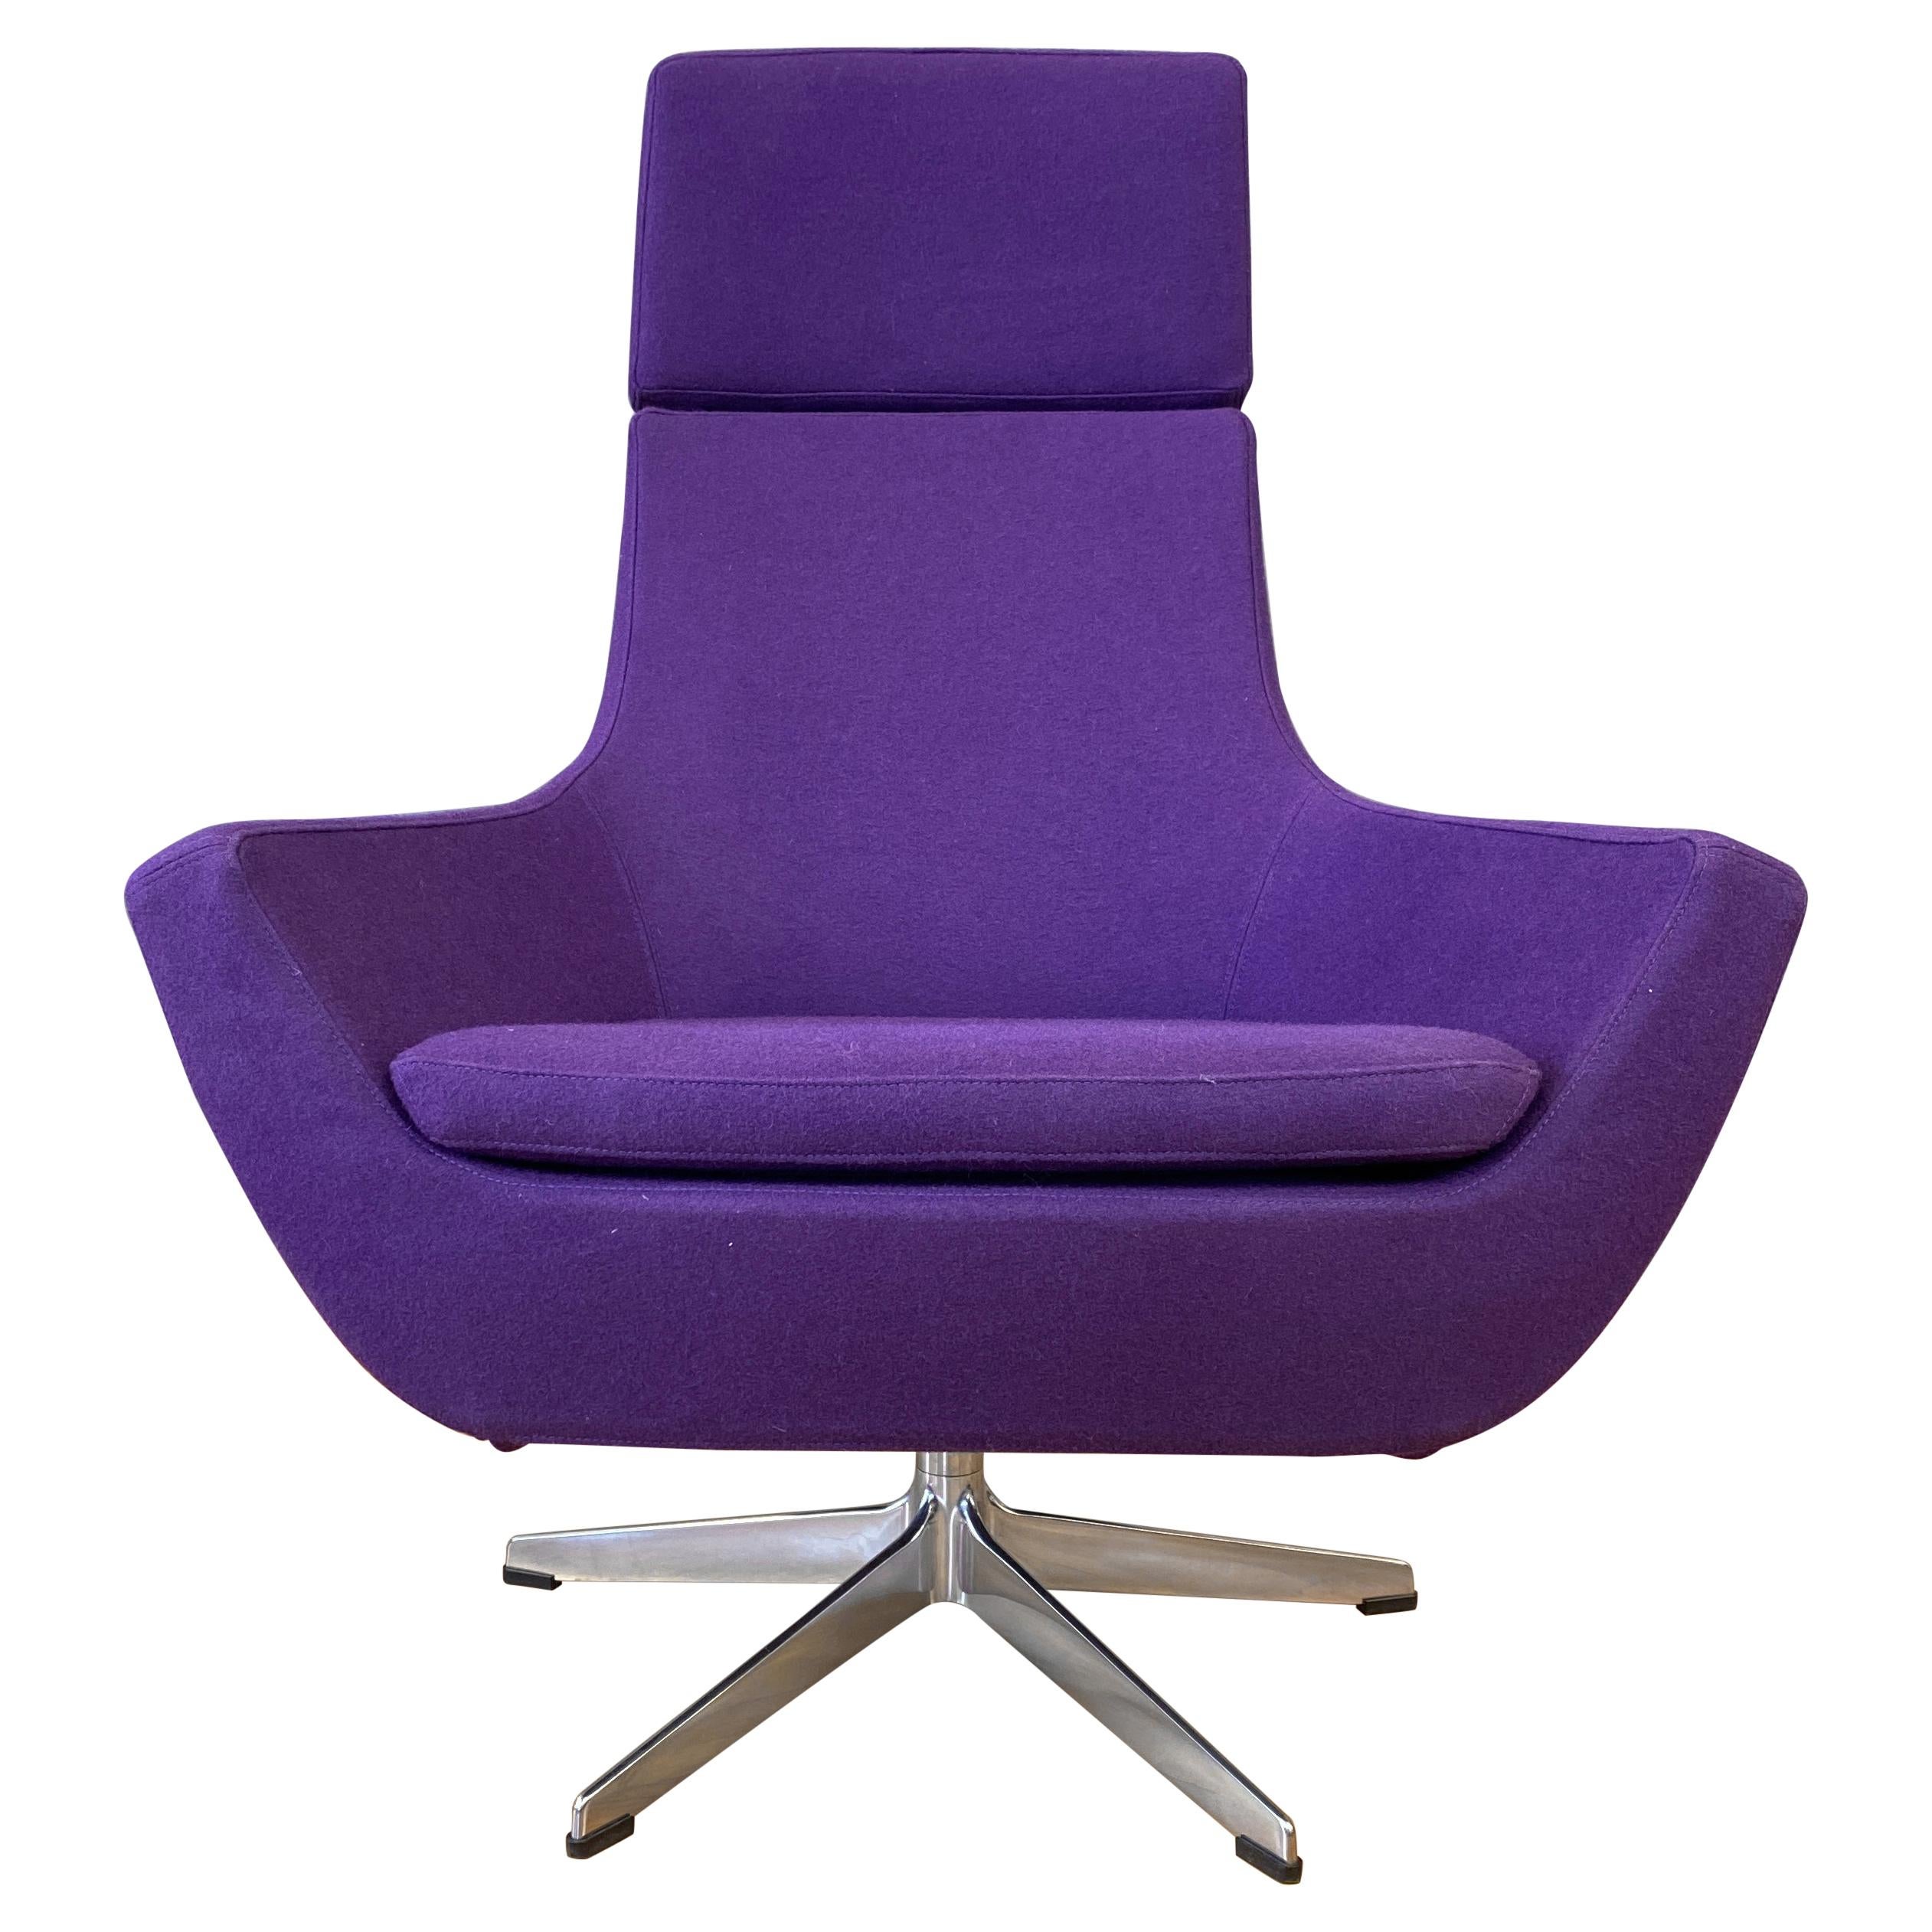 Swedes "Happy Swing" Lounge Chair in Purple by Roger Persson